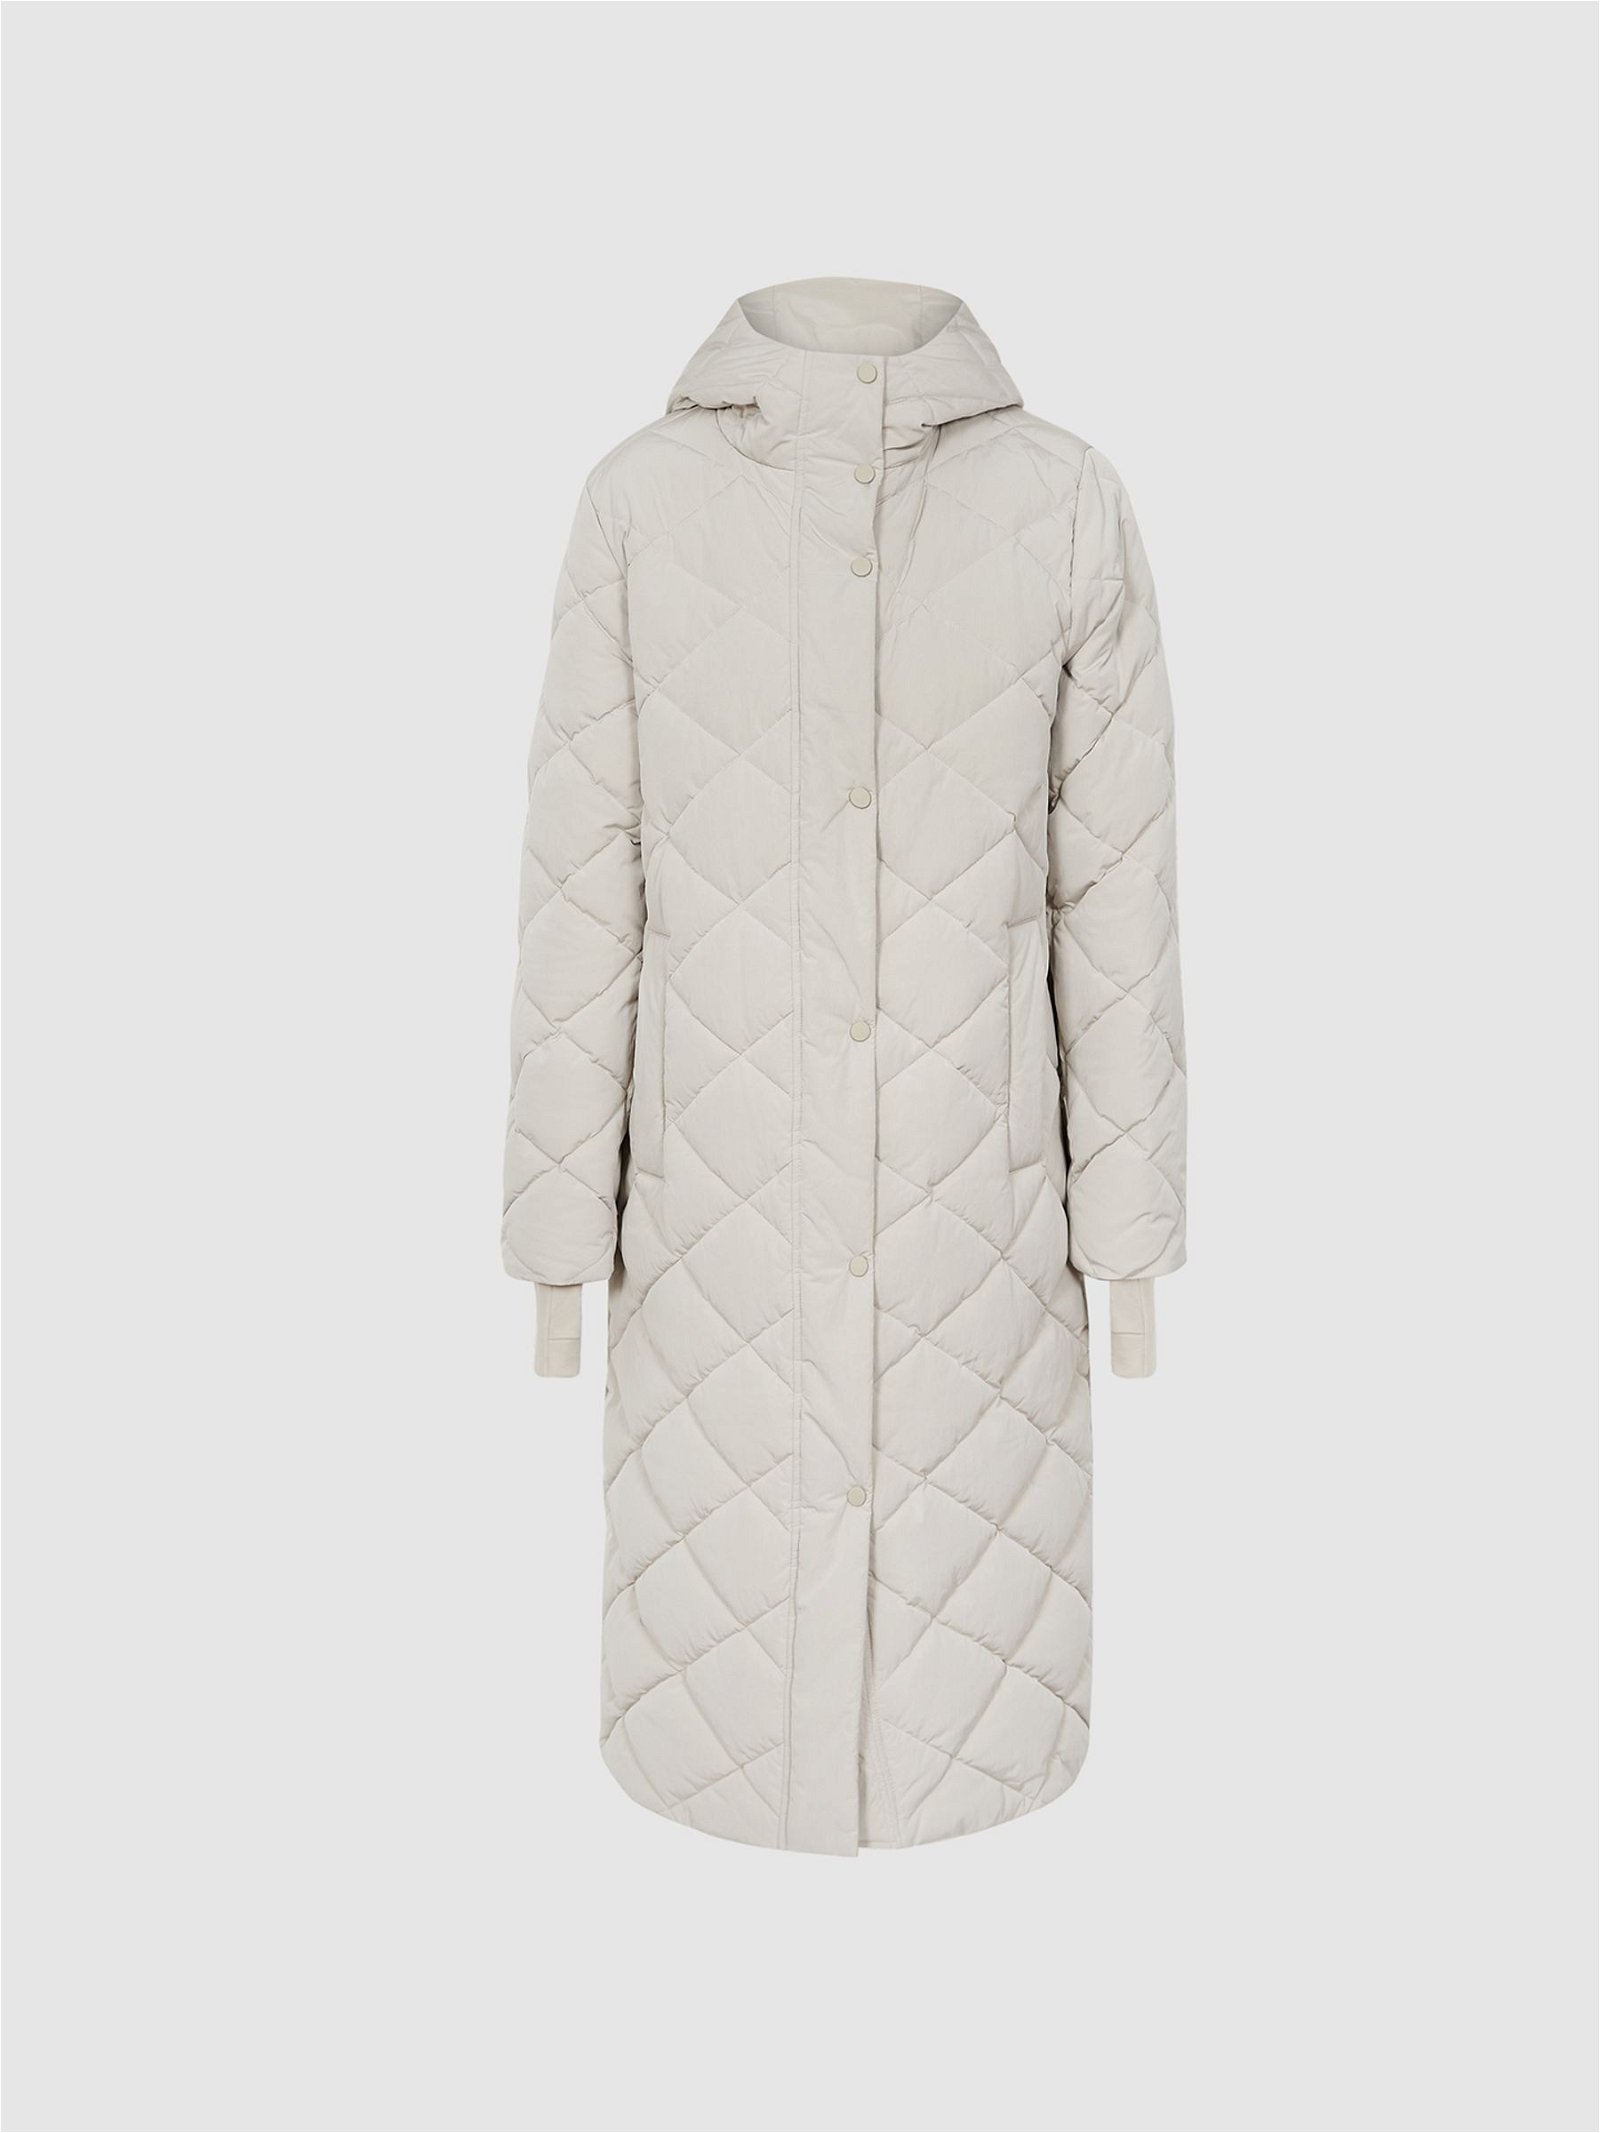 REISS Cami Quilted Puffer Coat in Stone | Endource